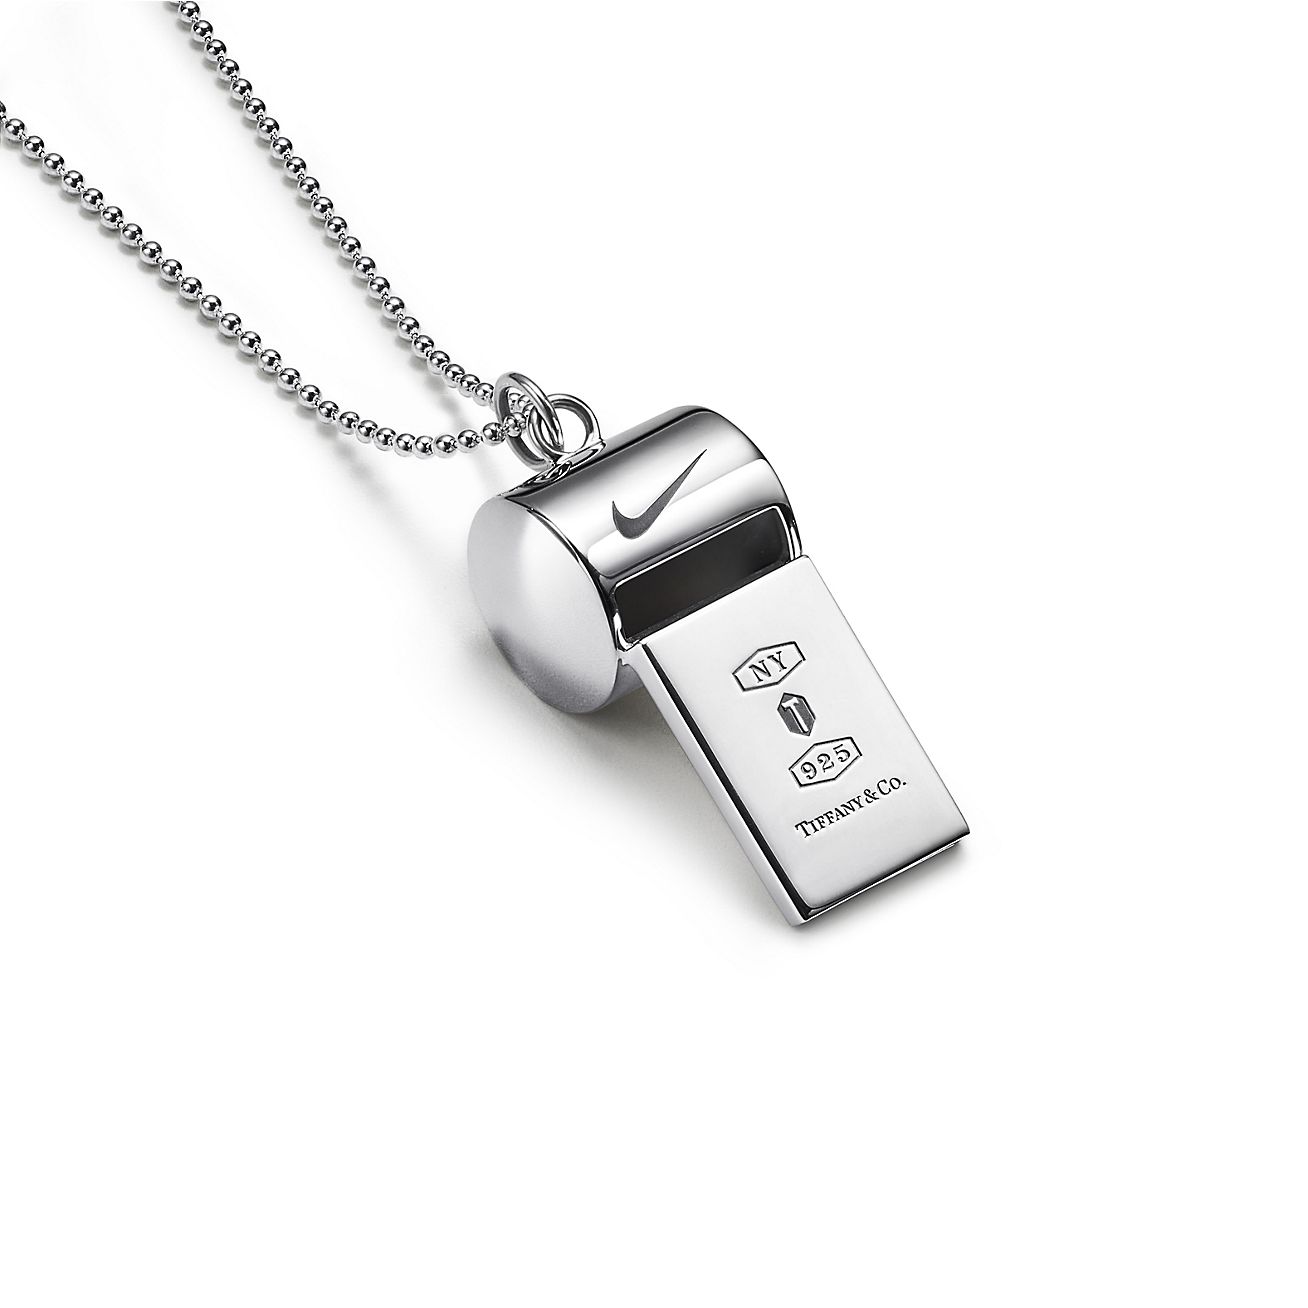 Nike/Tiffany Whistle Pendant in Sterling Silver